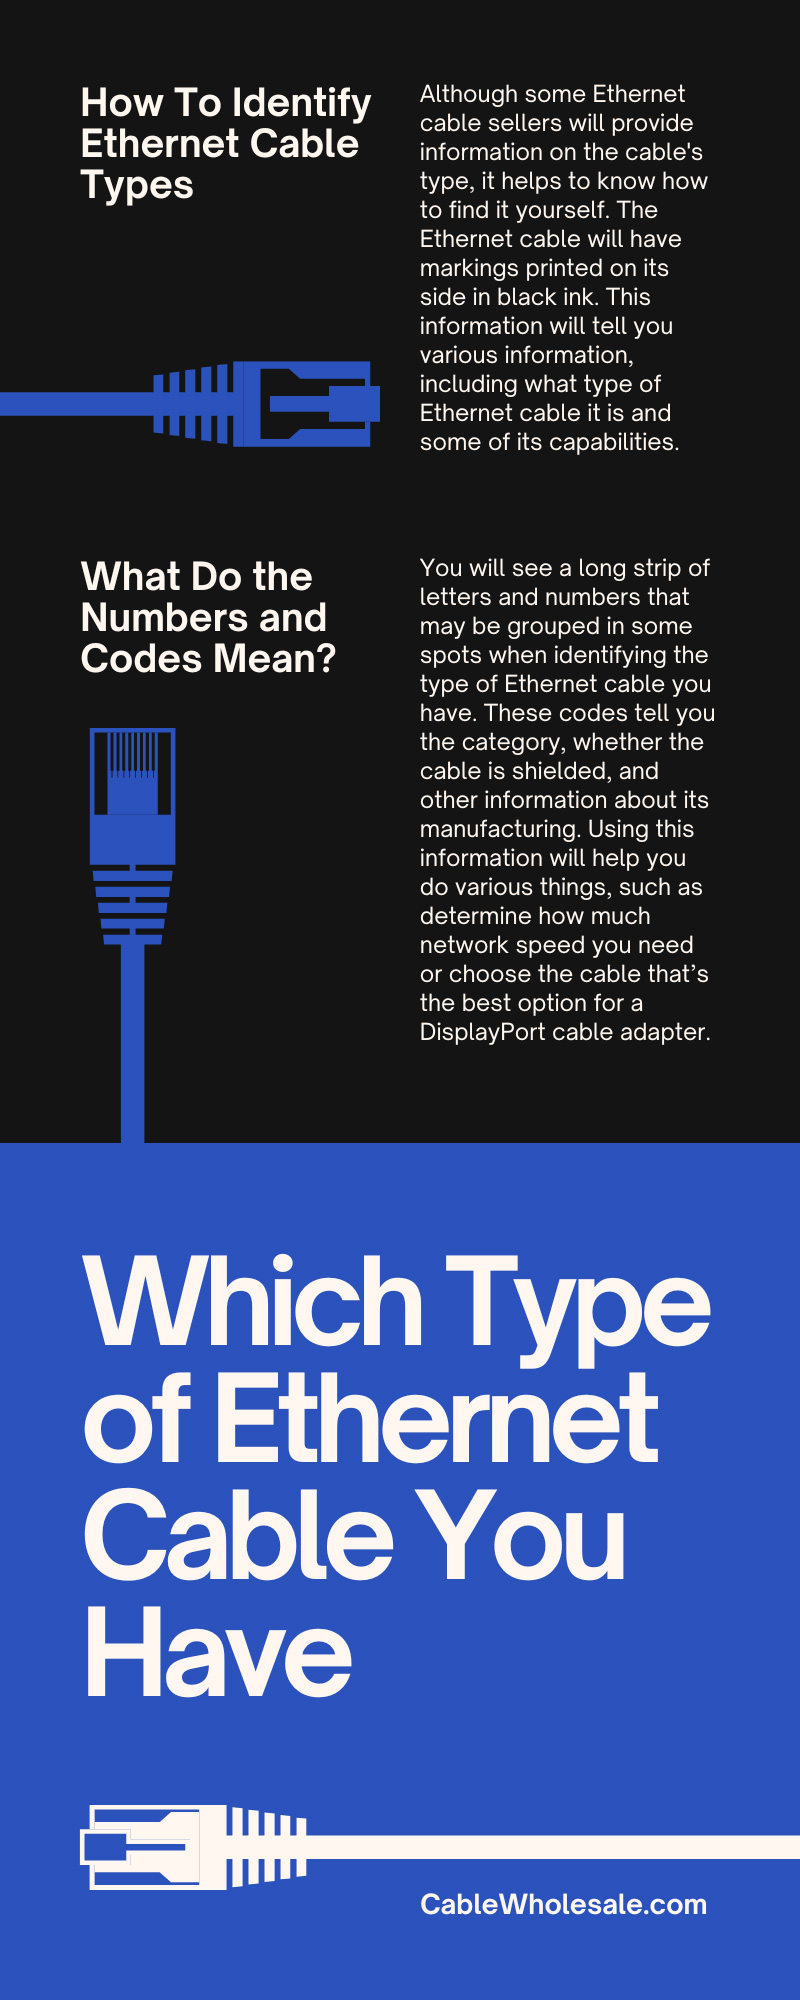 How To Identify Which Type of Ethernet Cable You Have